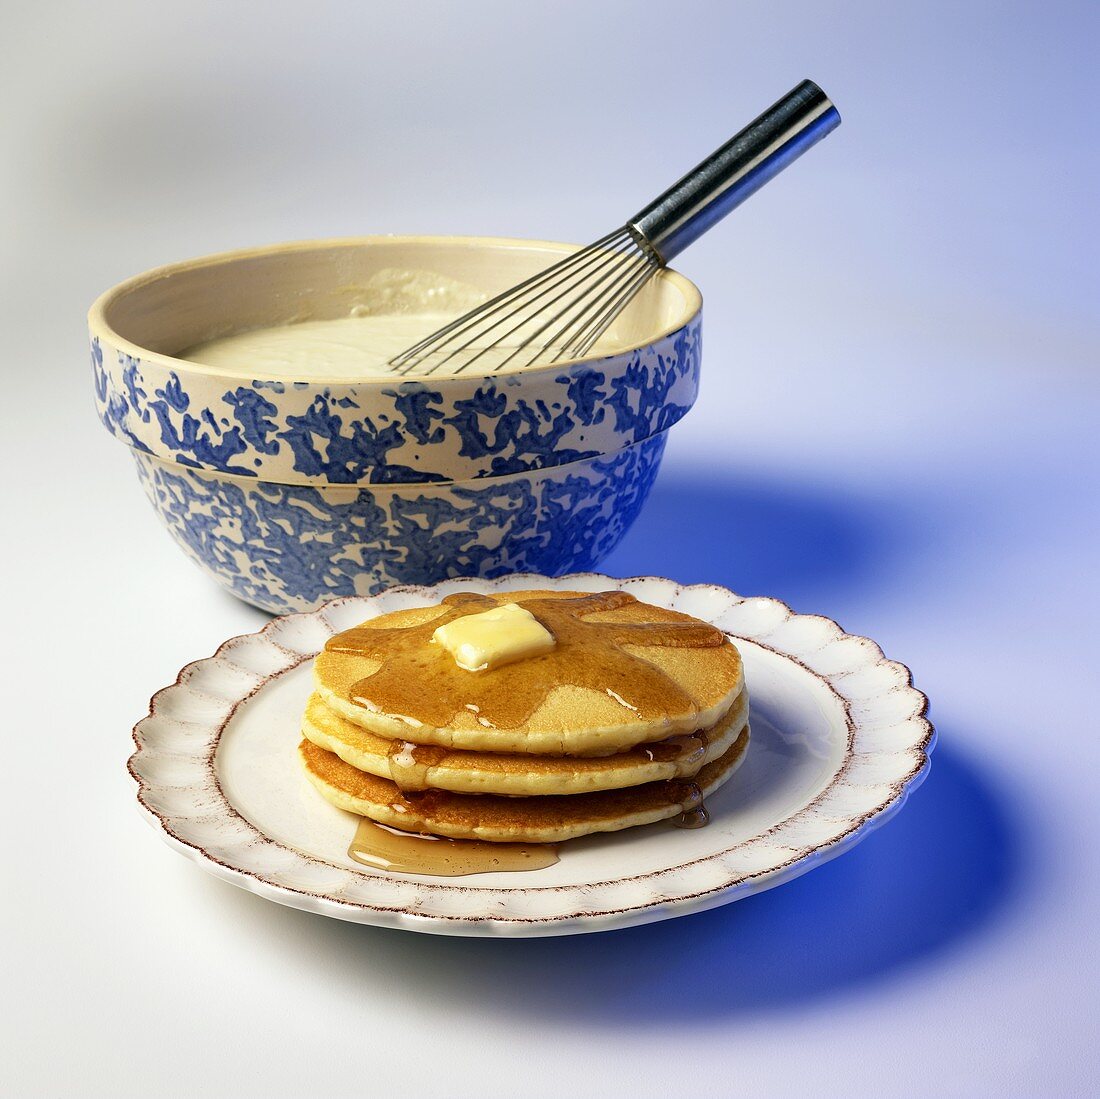 A Stack of Pancakes with Butter and Syrup; Batter